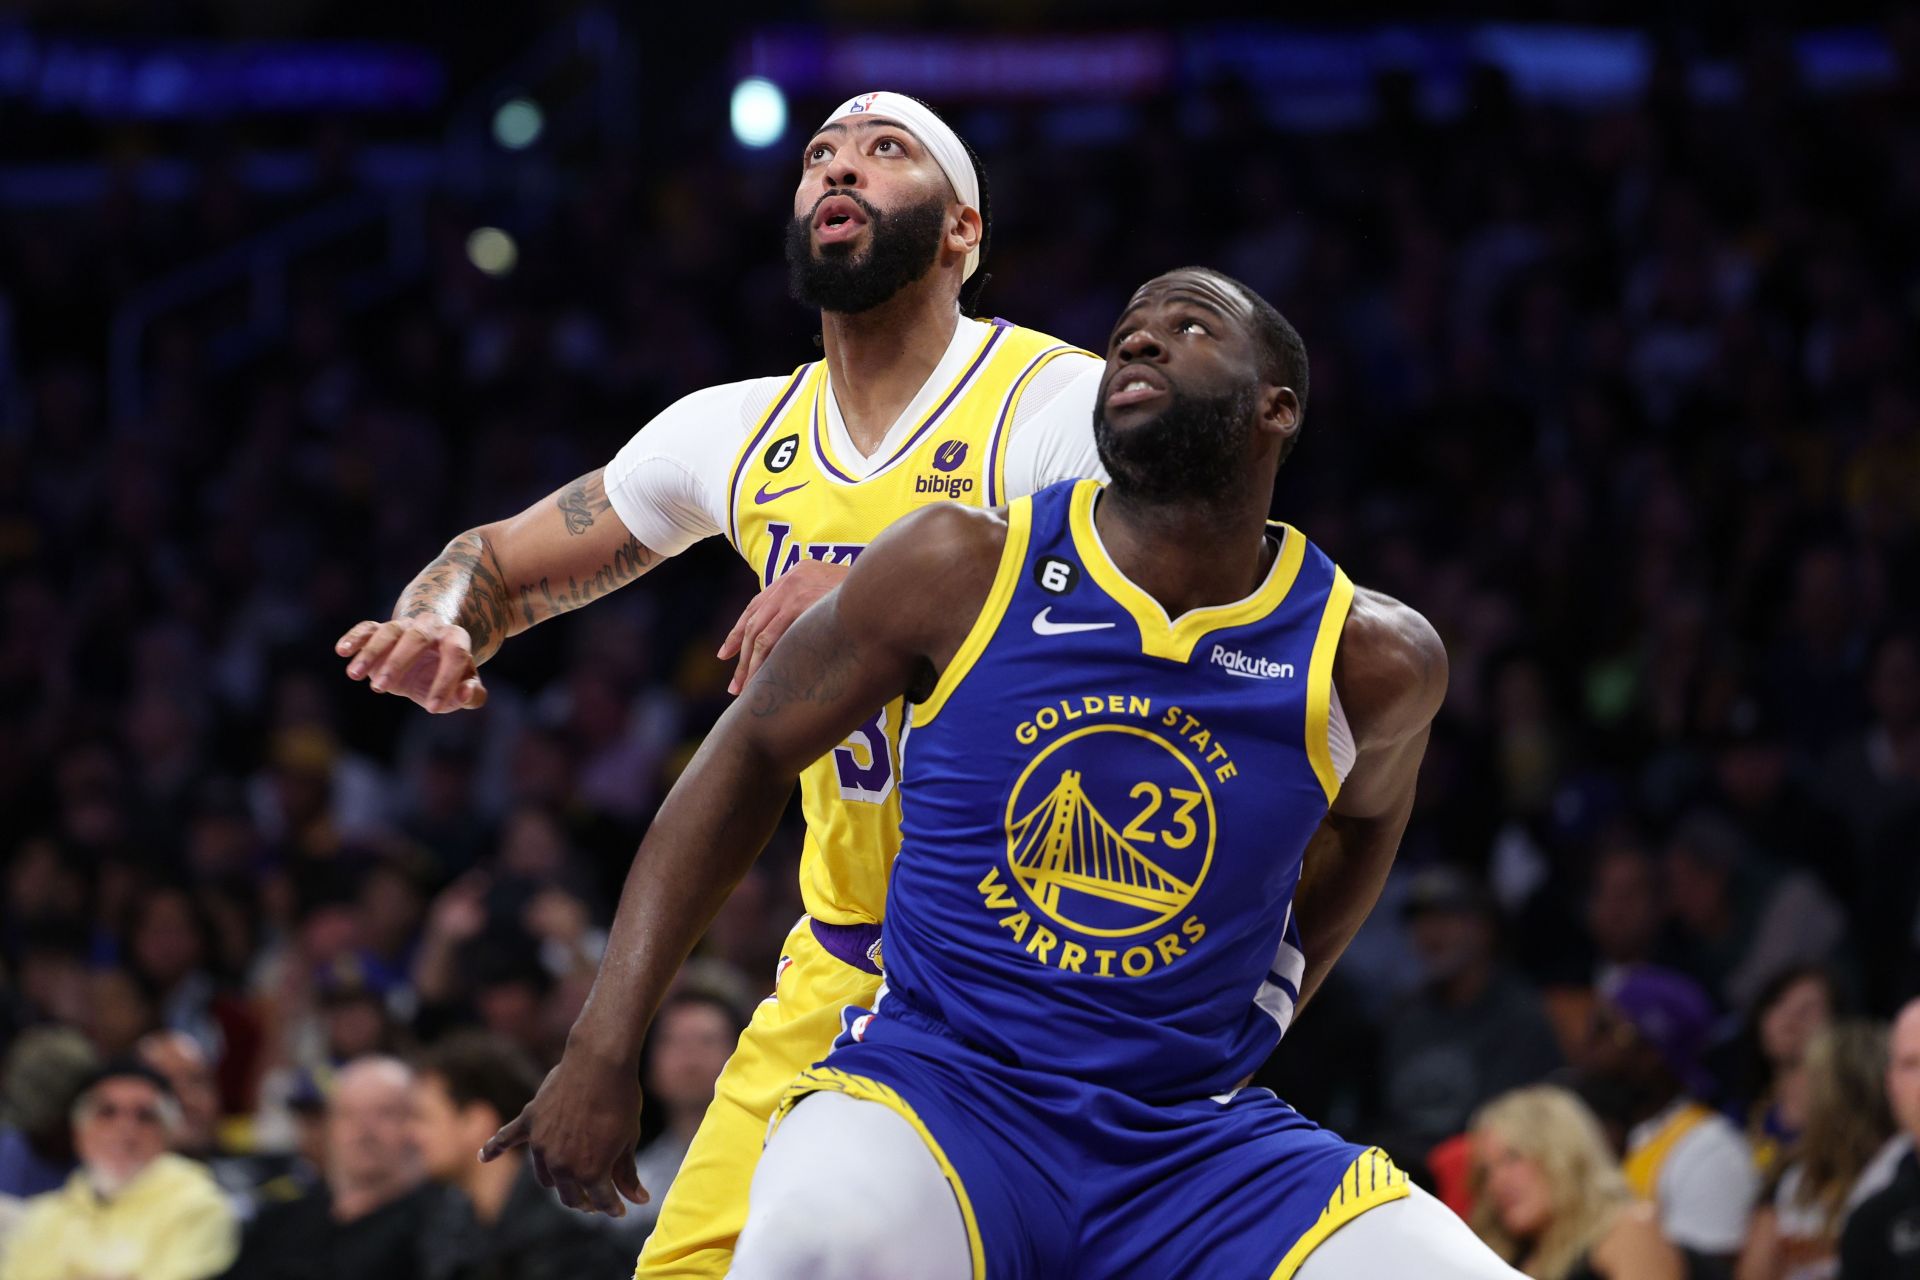 Anthony Davis of the LA Lakers and Draymond Green of the Golden State Warriors.